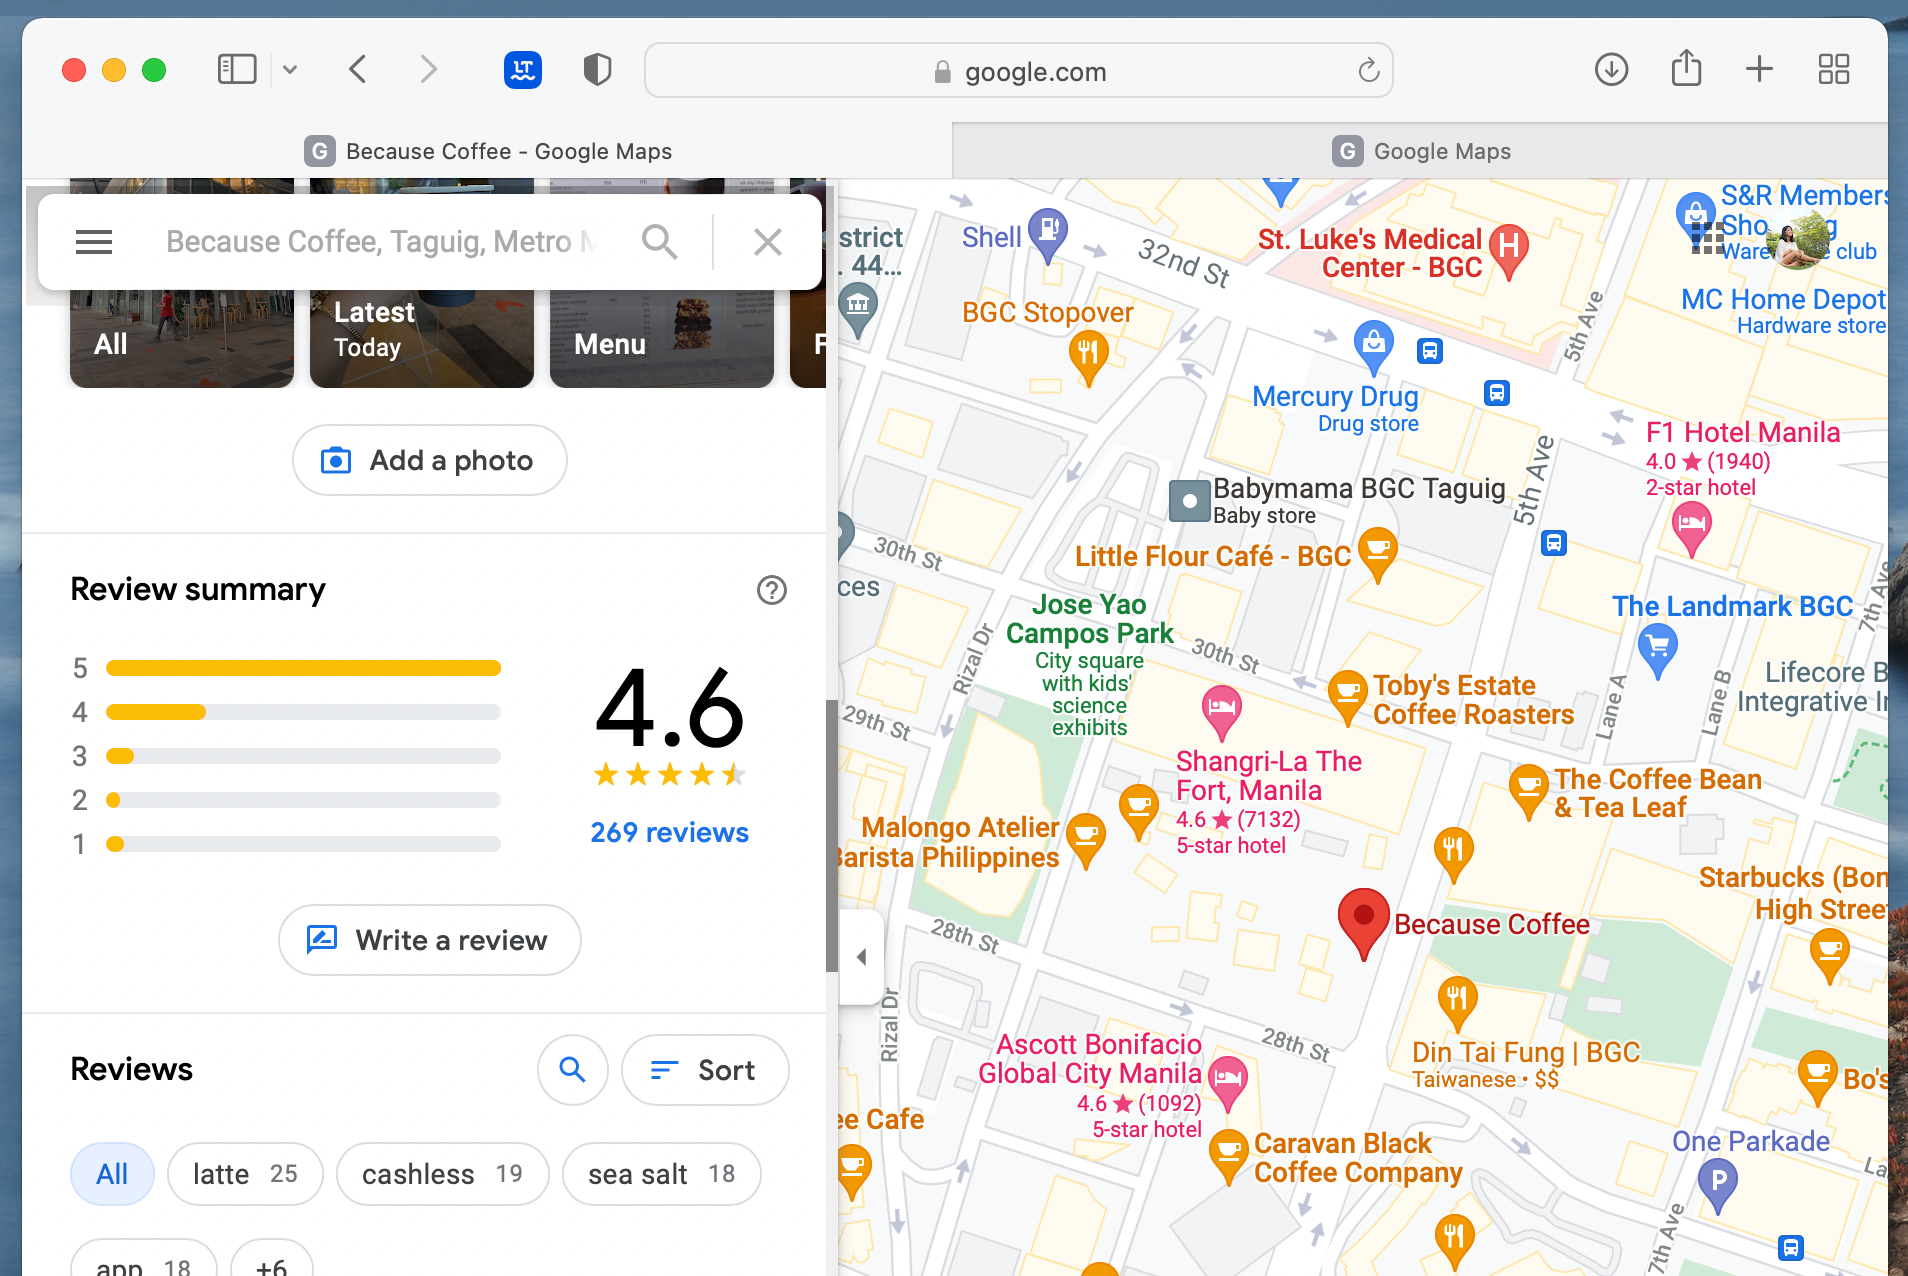 Write a review on Google Maps